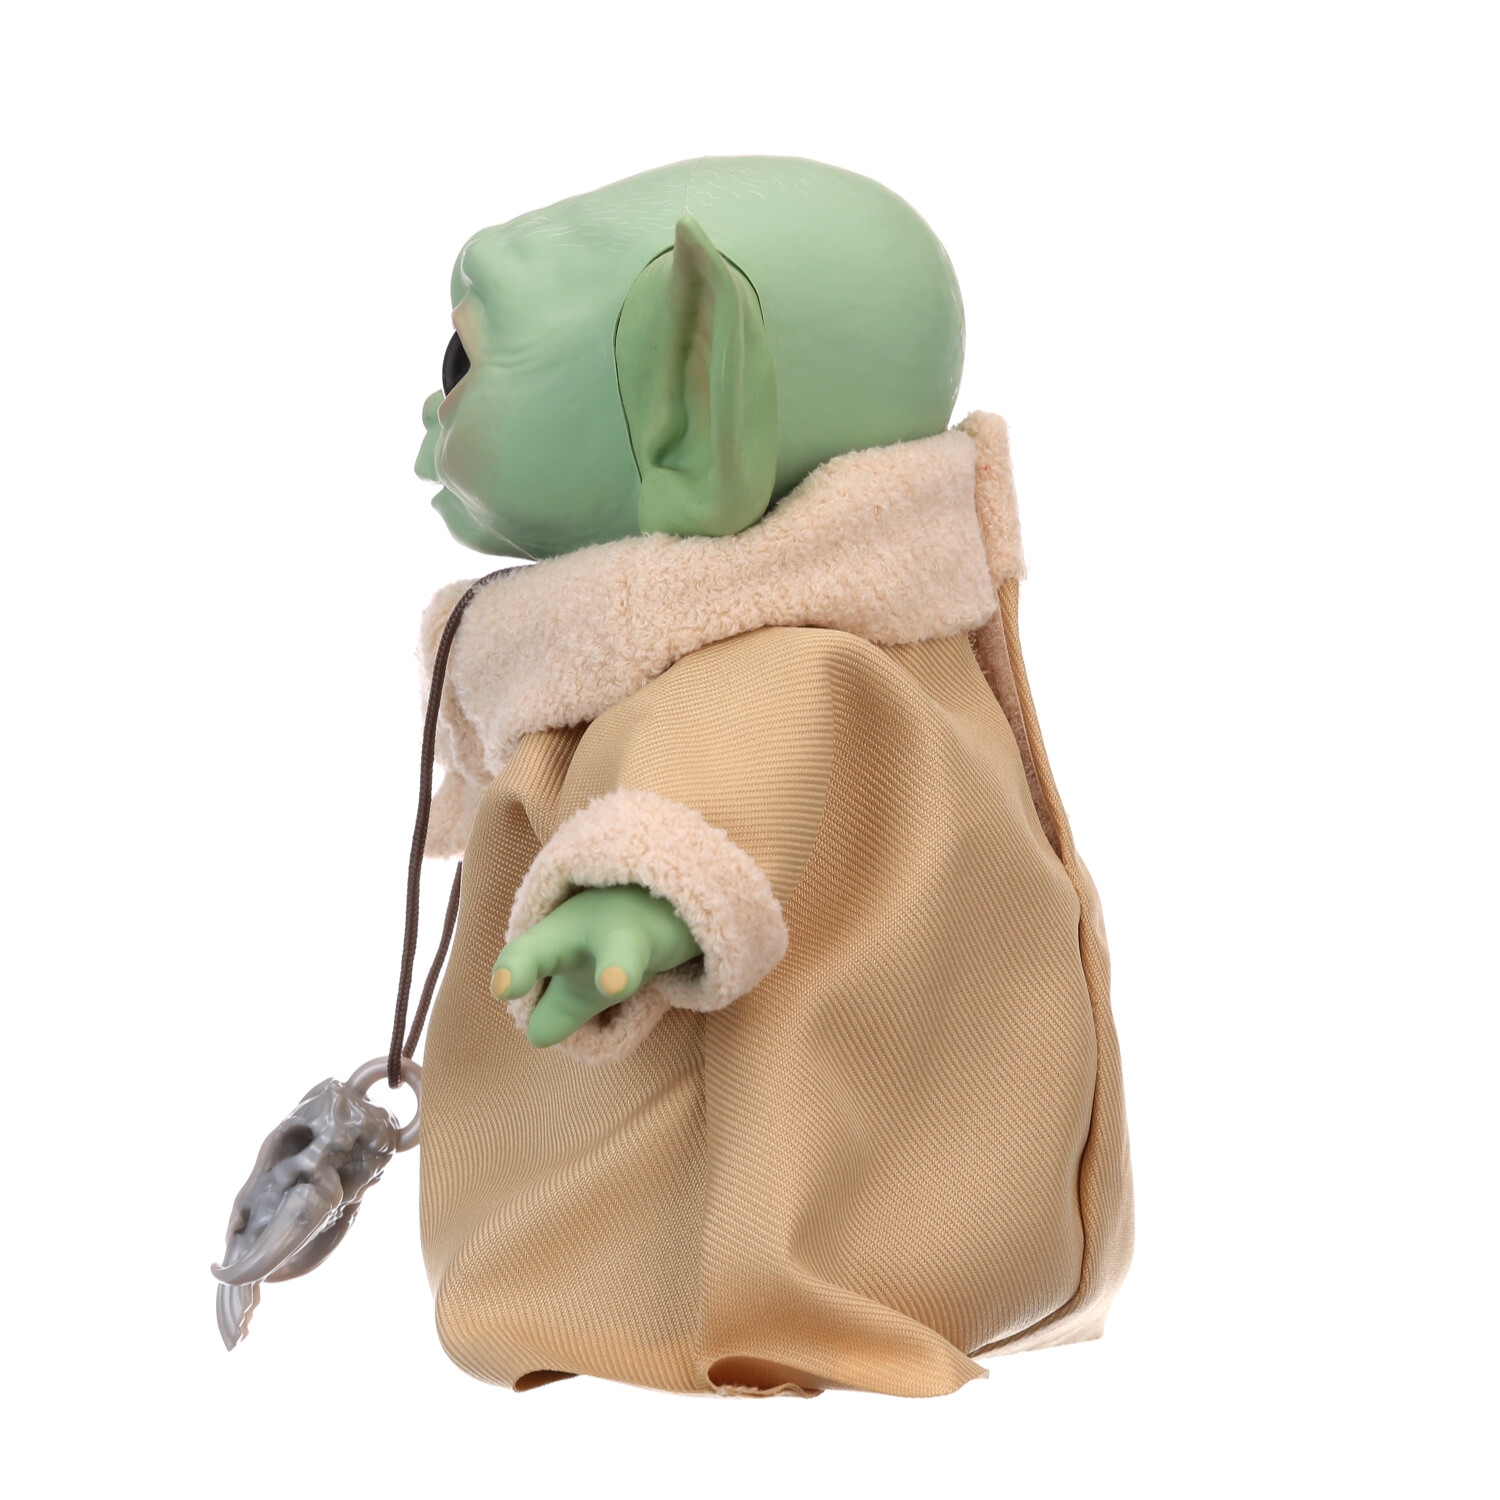 Star Wars: The Child Baby Yoda Kids Toy Action Figure for Boys and Girls Ages  4 5 6 7 8 and Up (7”) 